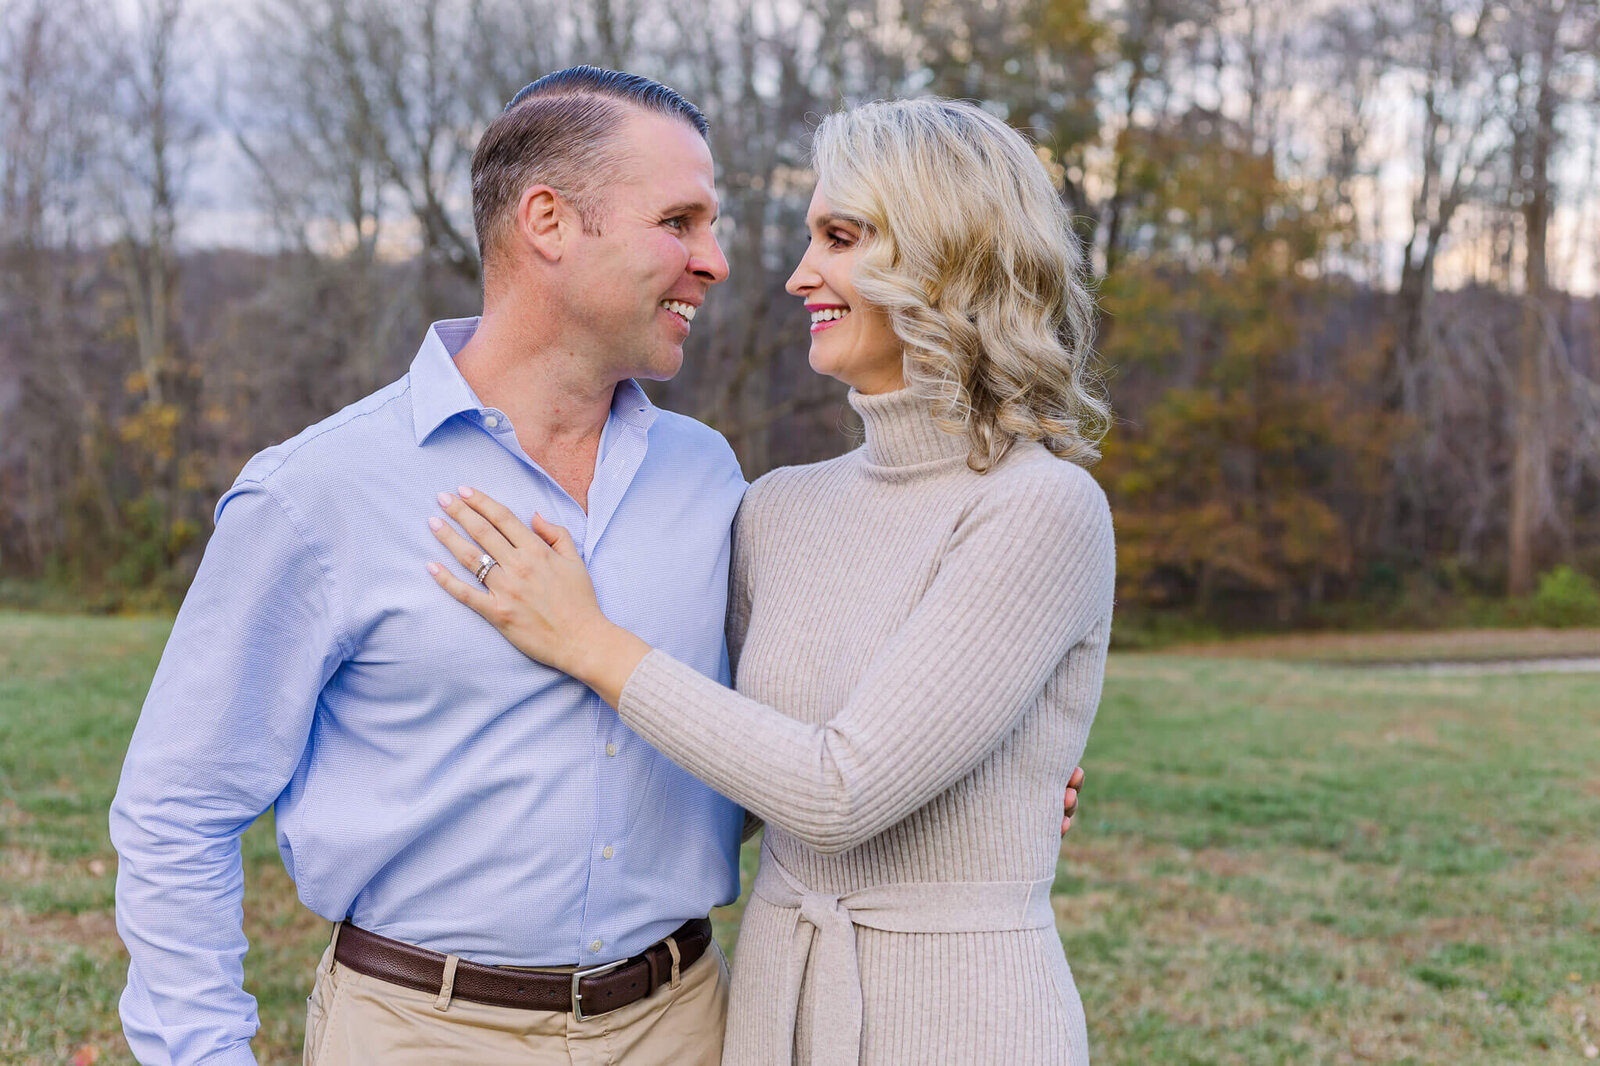 A mom and dad looking lovingly at each other during a family photo session in Northern Virginia.